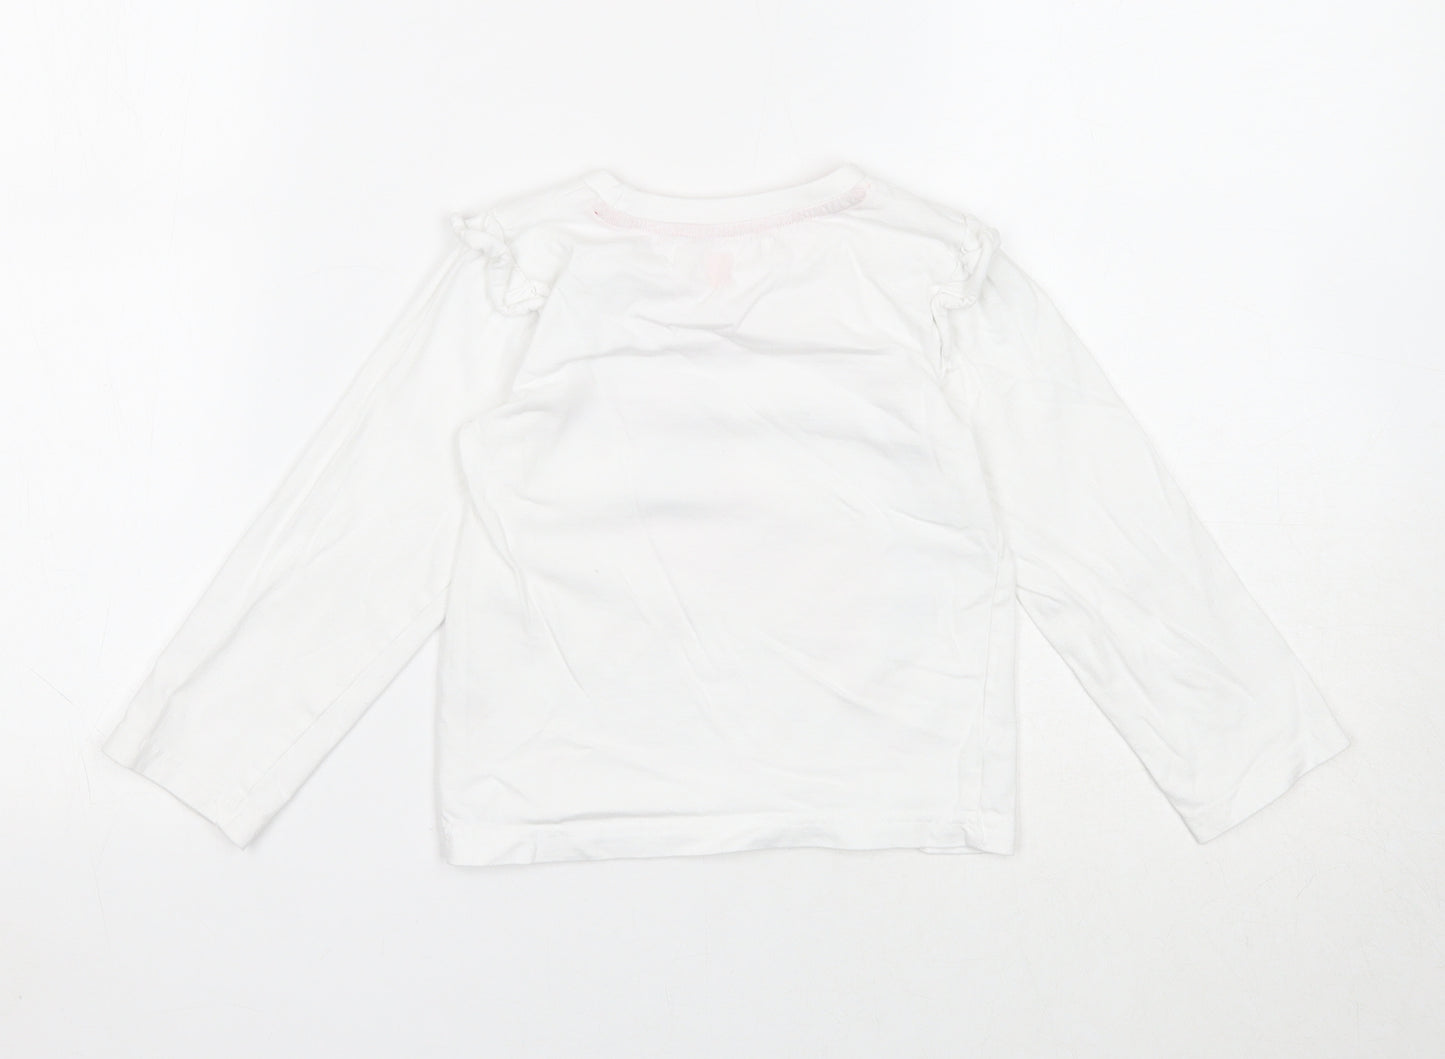 Sleigh Bells Girls White Cotton Basic T-Shirt Size 3-4 Years Round Neck Pullover - Christmas Top